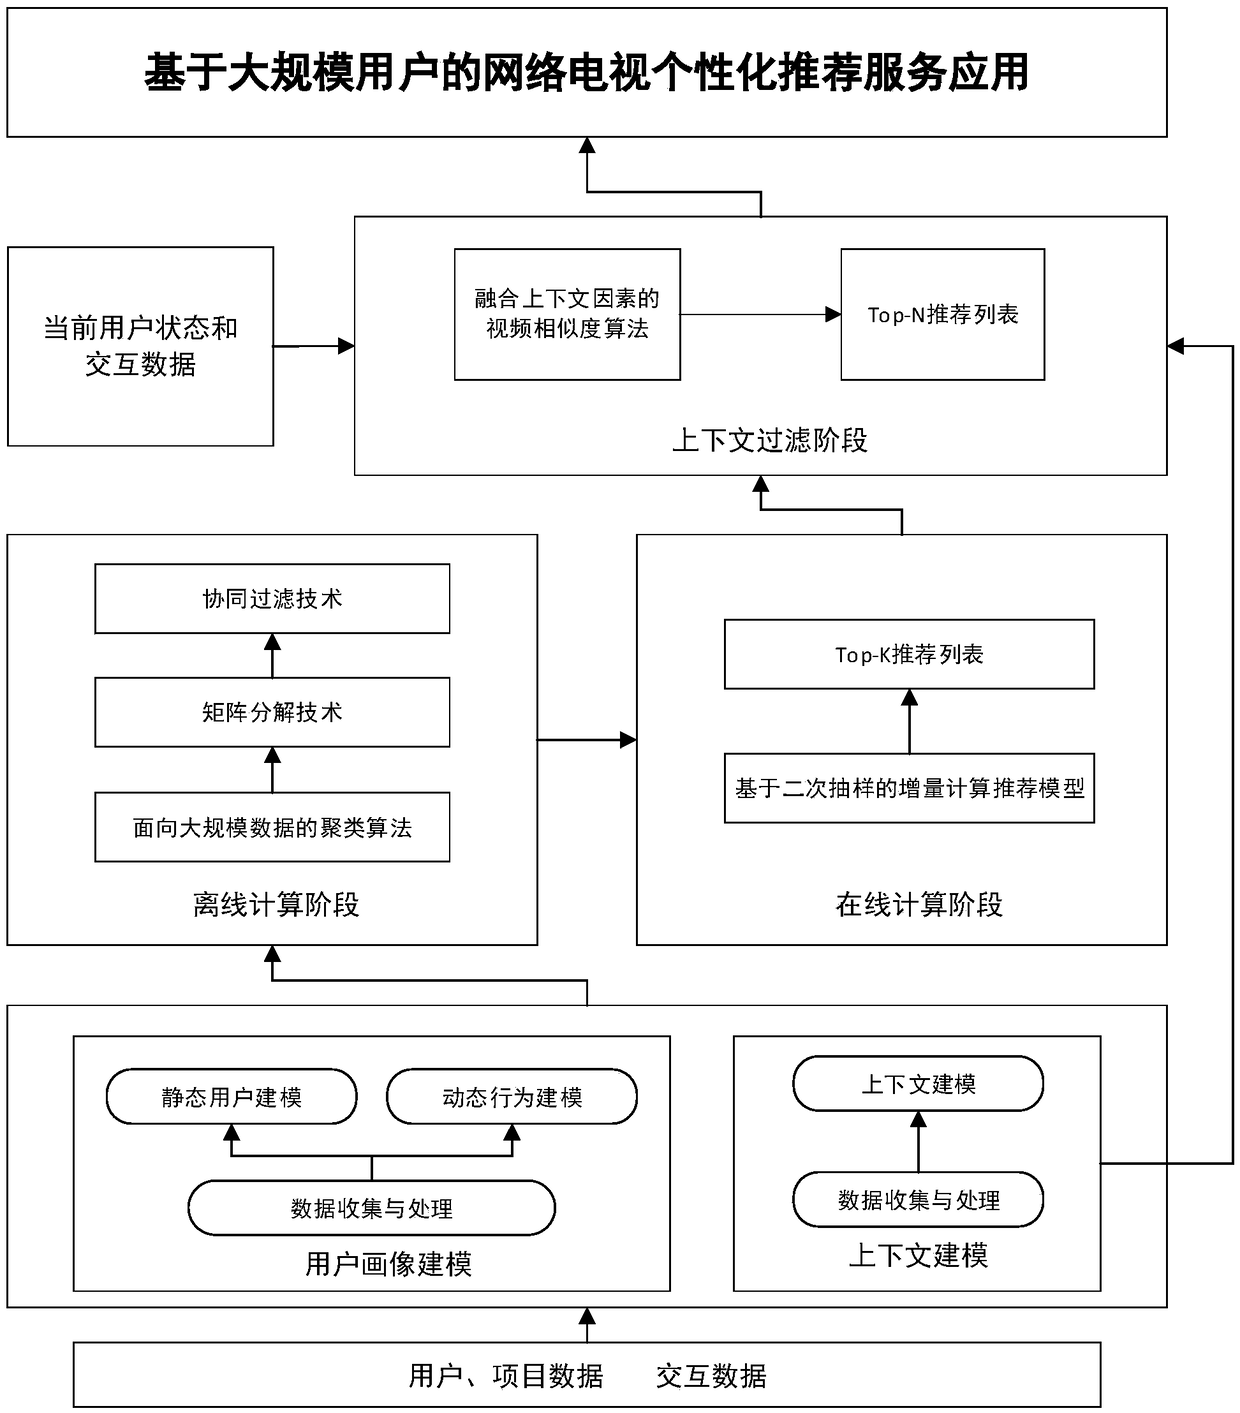 Personalized service recommendation method of network television for large-scale users